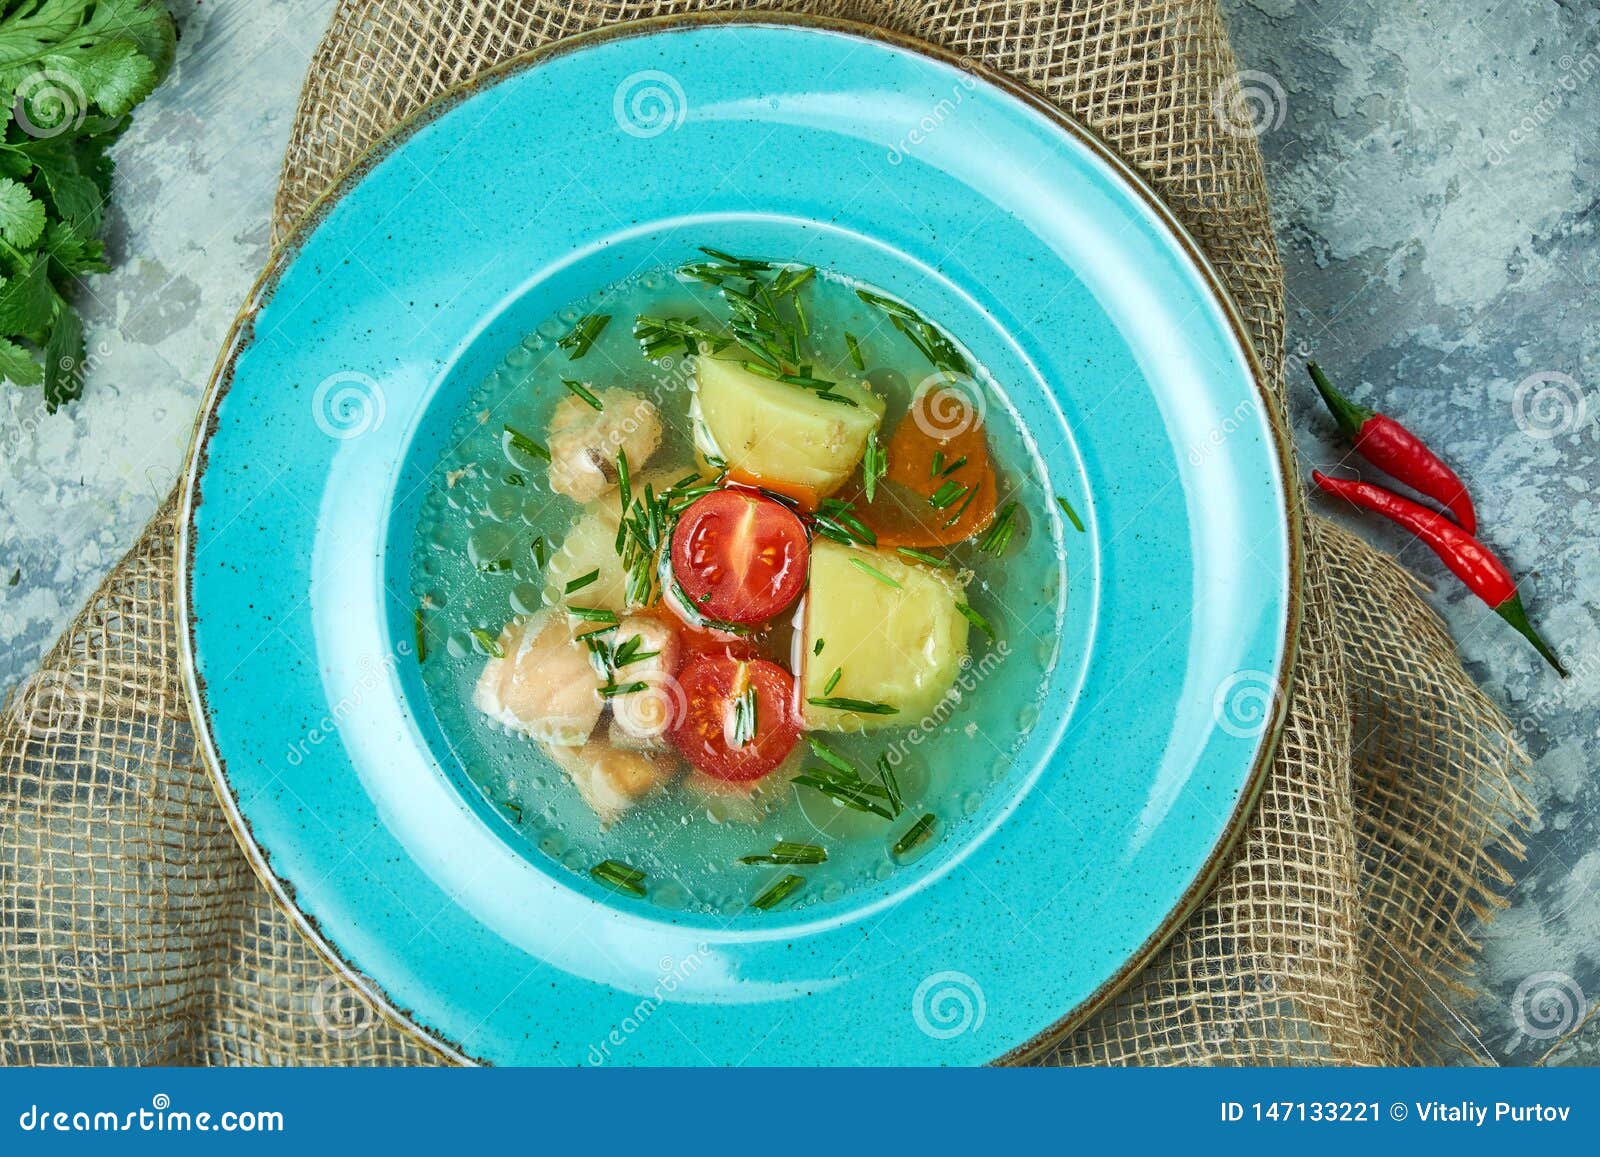 Red Fish Soup In A Blue Plate. Beautiful Serving Dishes